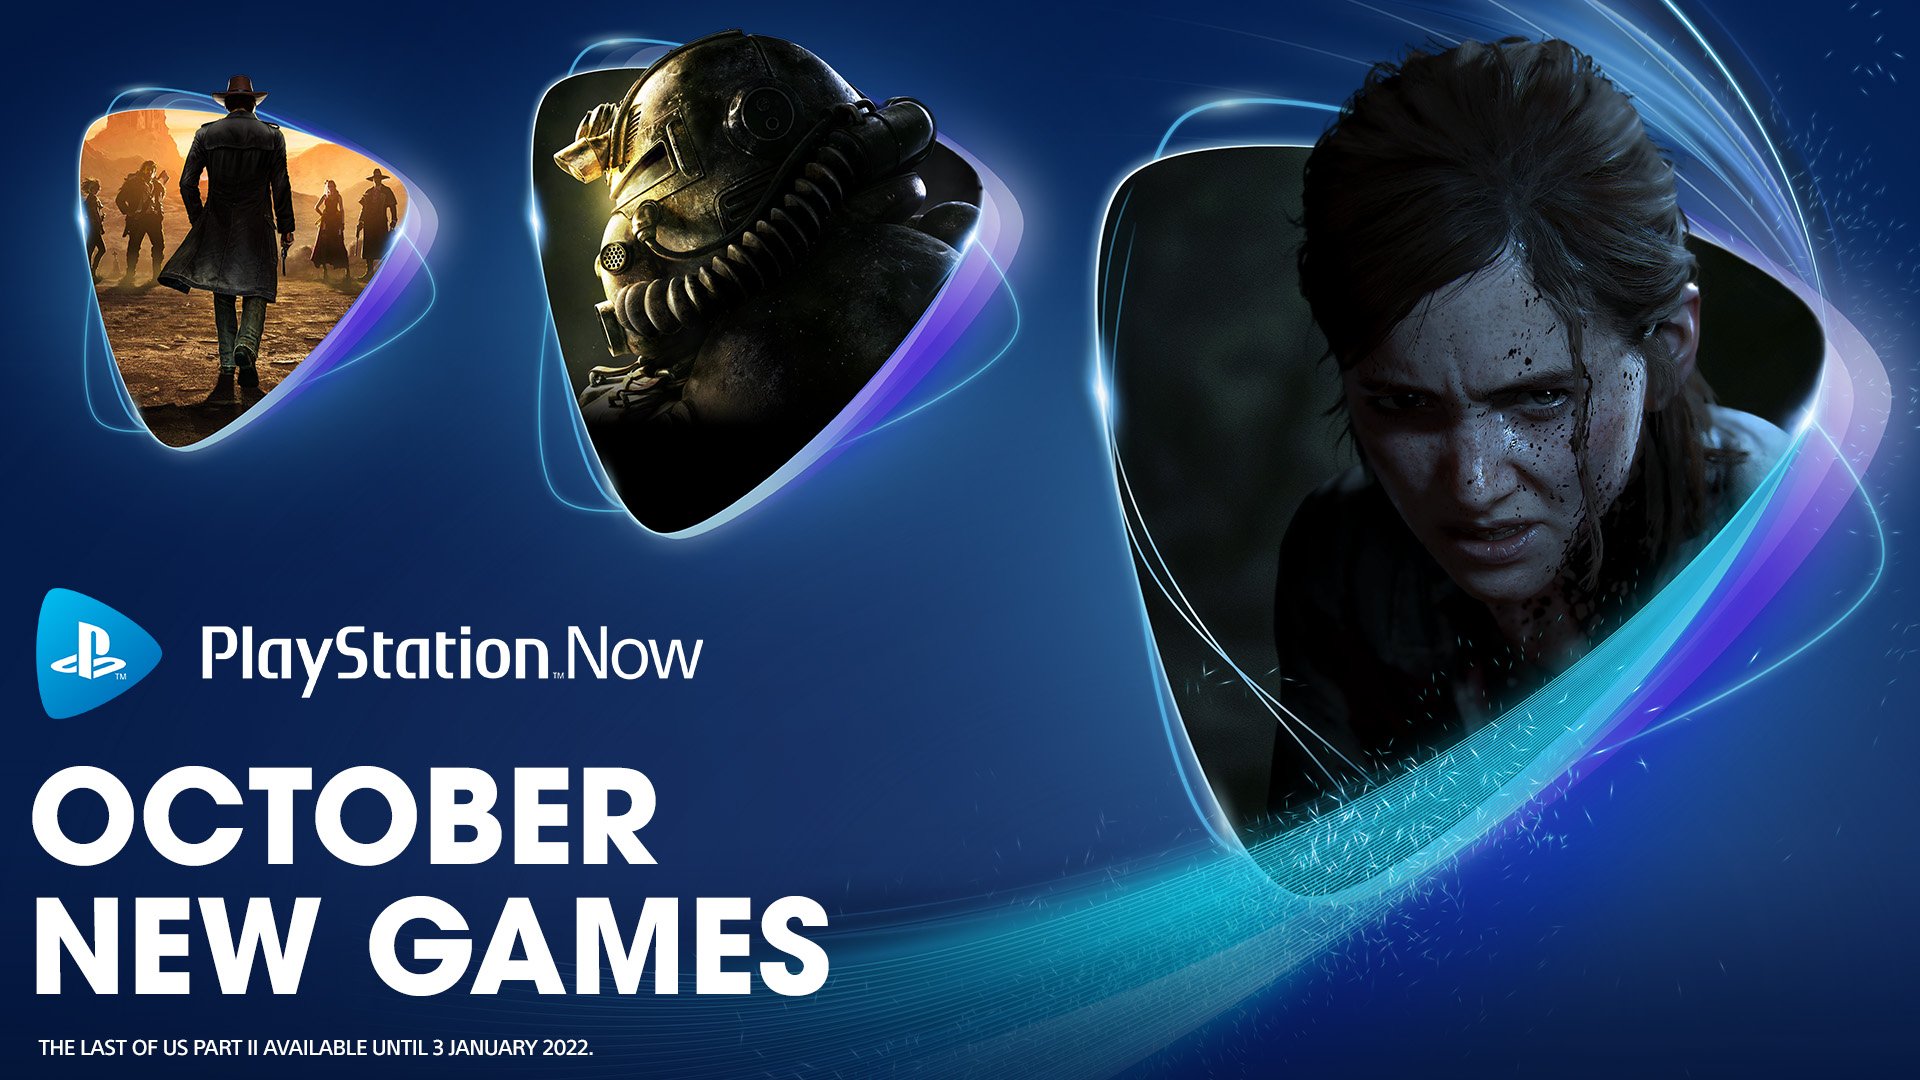 PlayStation Now adds The Last of Us Part II, Fallout 76, Final Fantasy VIII Remastered, and more in October – Gematsu